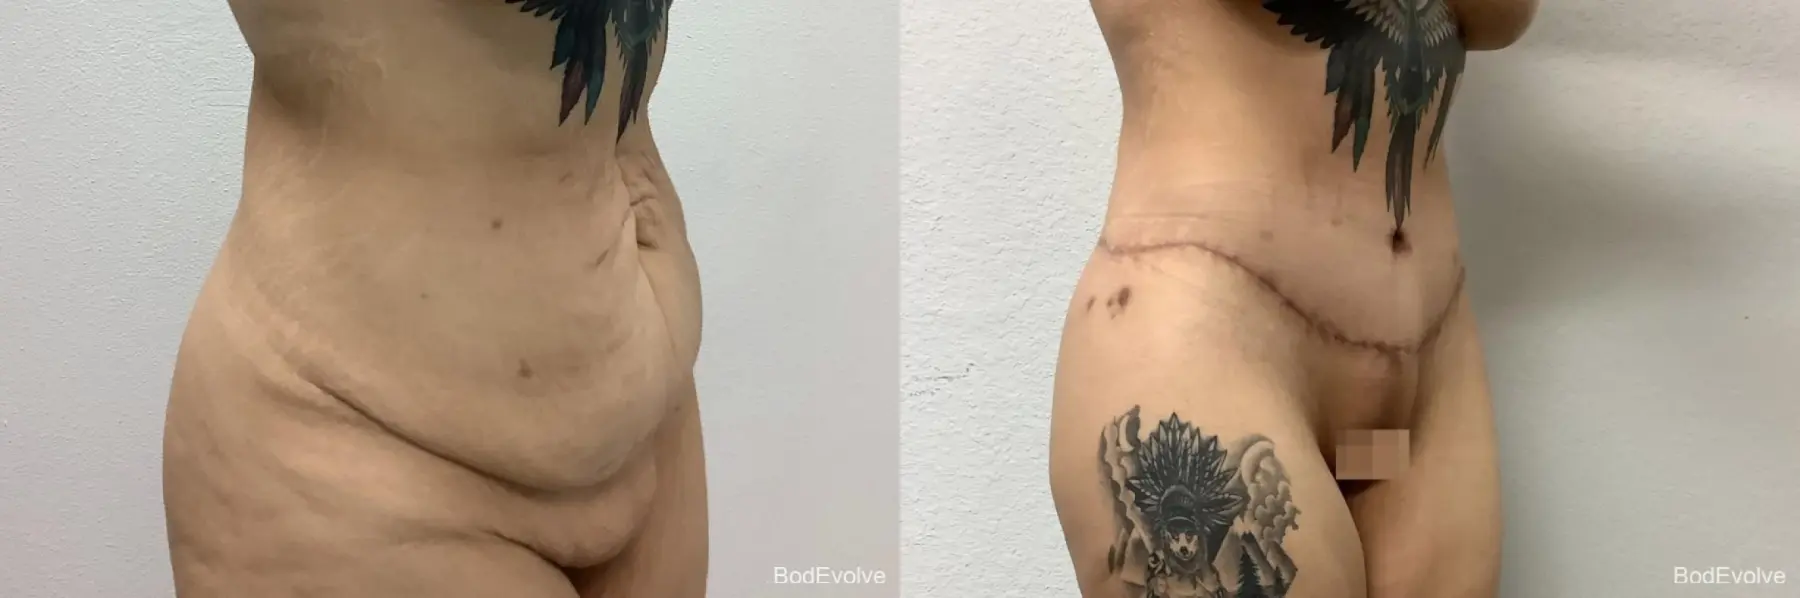 Body Lift: Patient 2 - Before and After 5